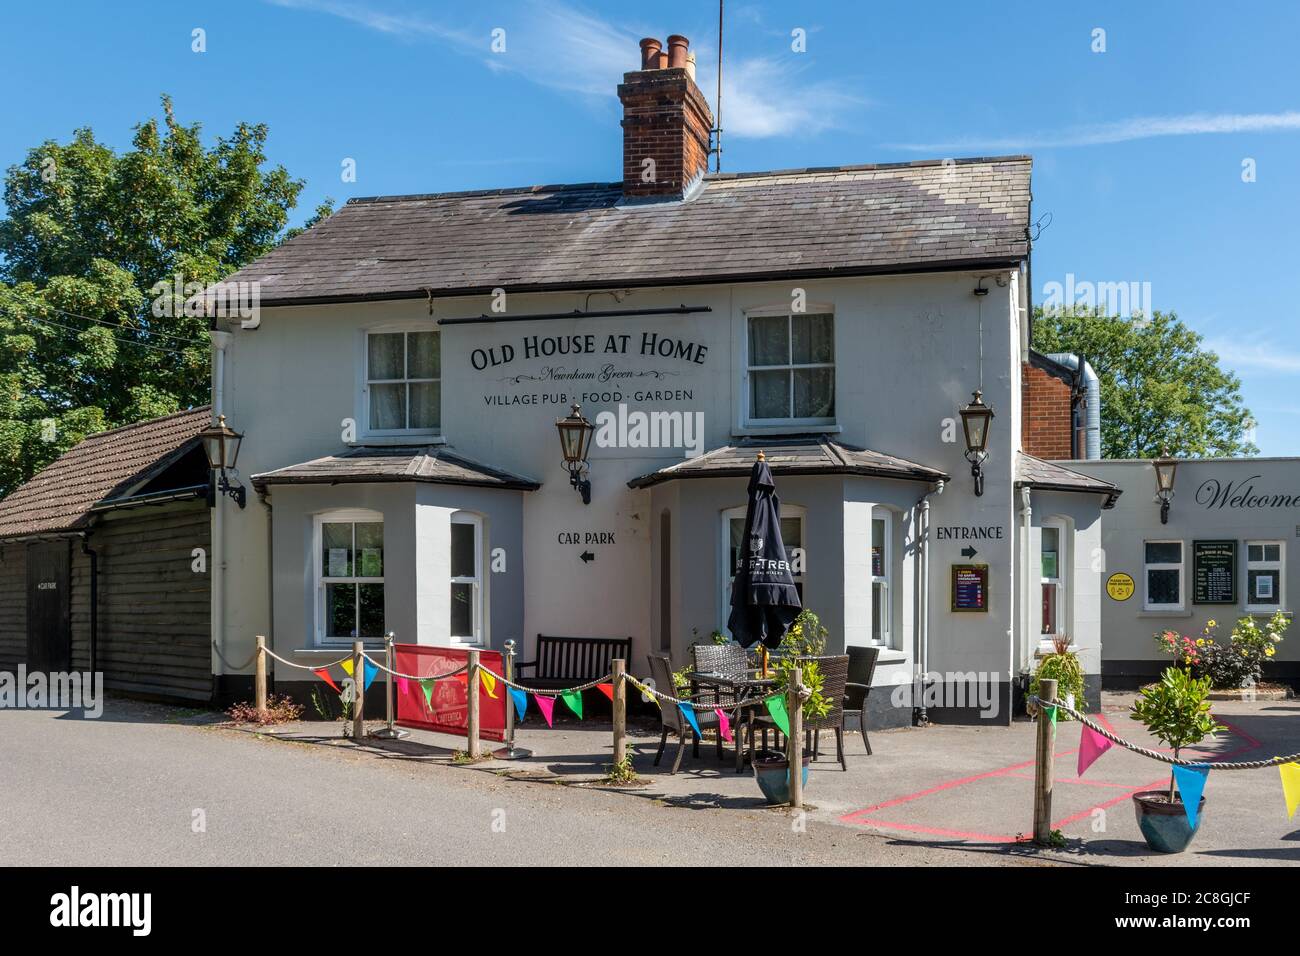 Old House at Home, a village pub in Newnham, Hampshire, UK Stock Photo